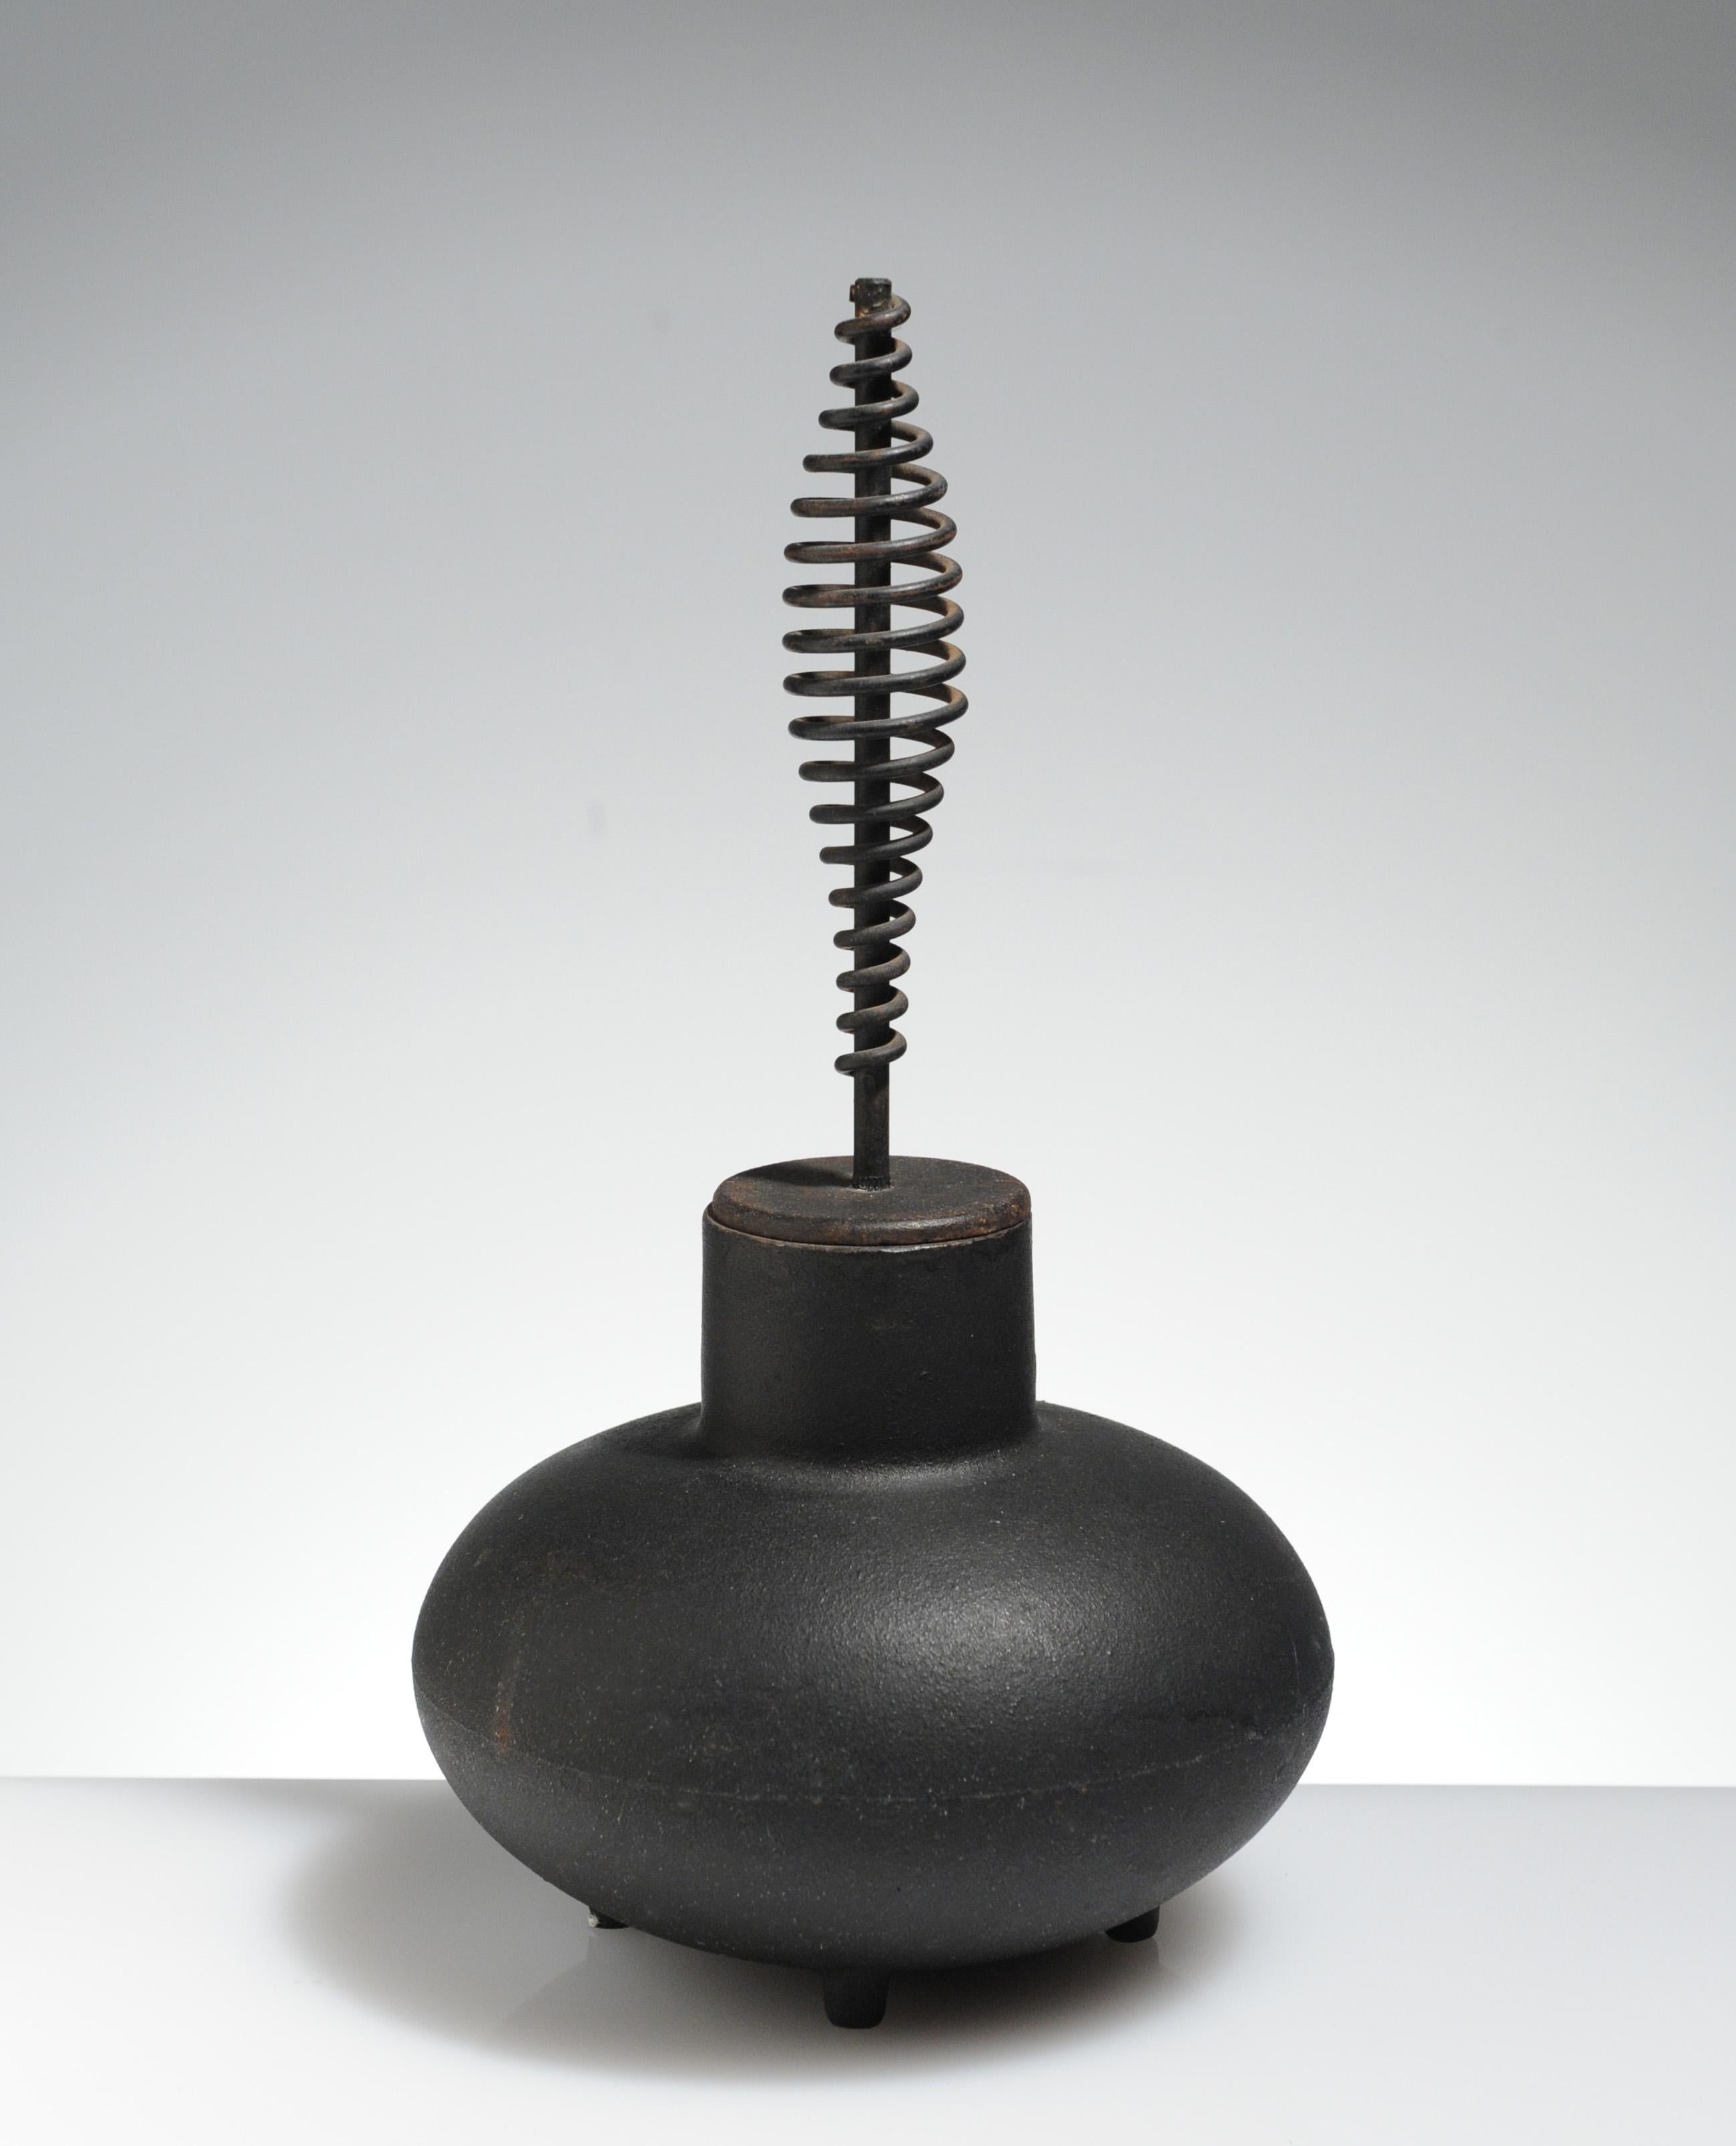 Excellent example of George Nelson designed firestarter. Made of cast iron by Howard Miller of Zeeland, Michigan.